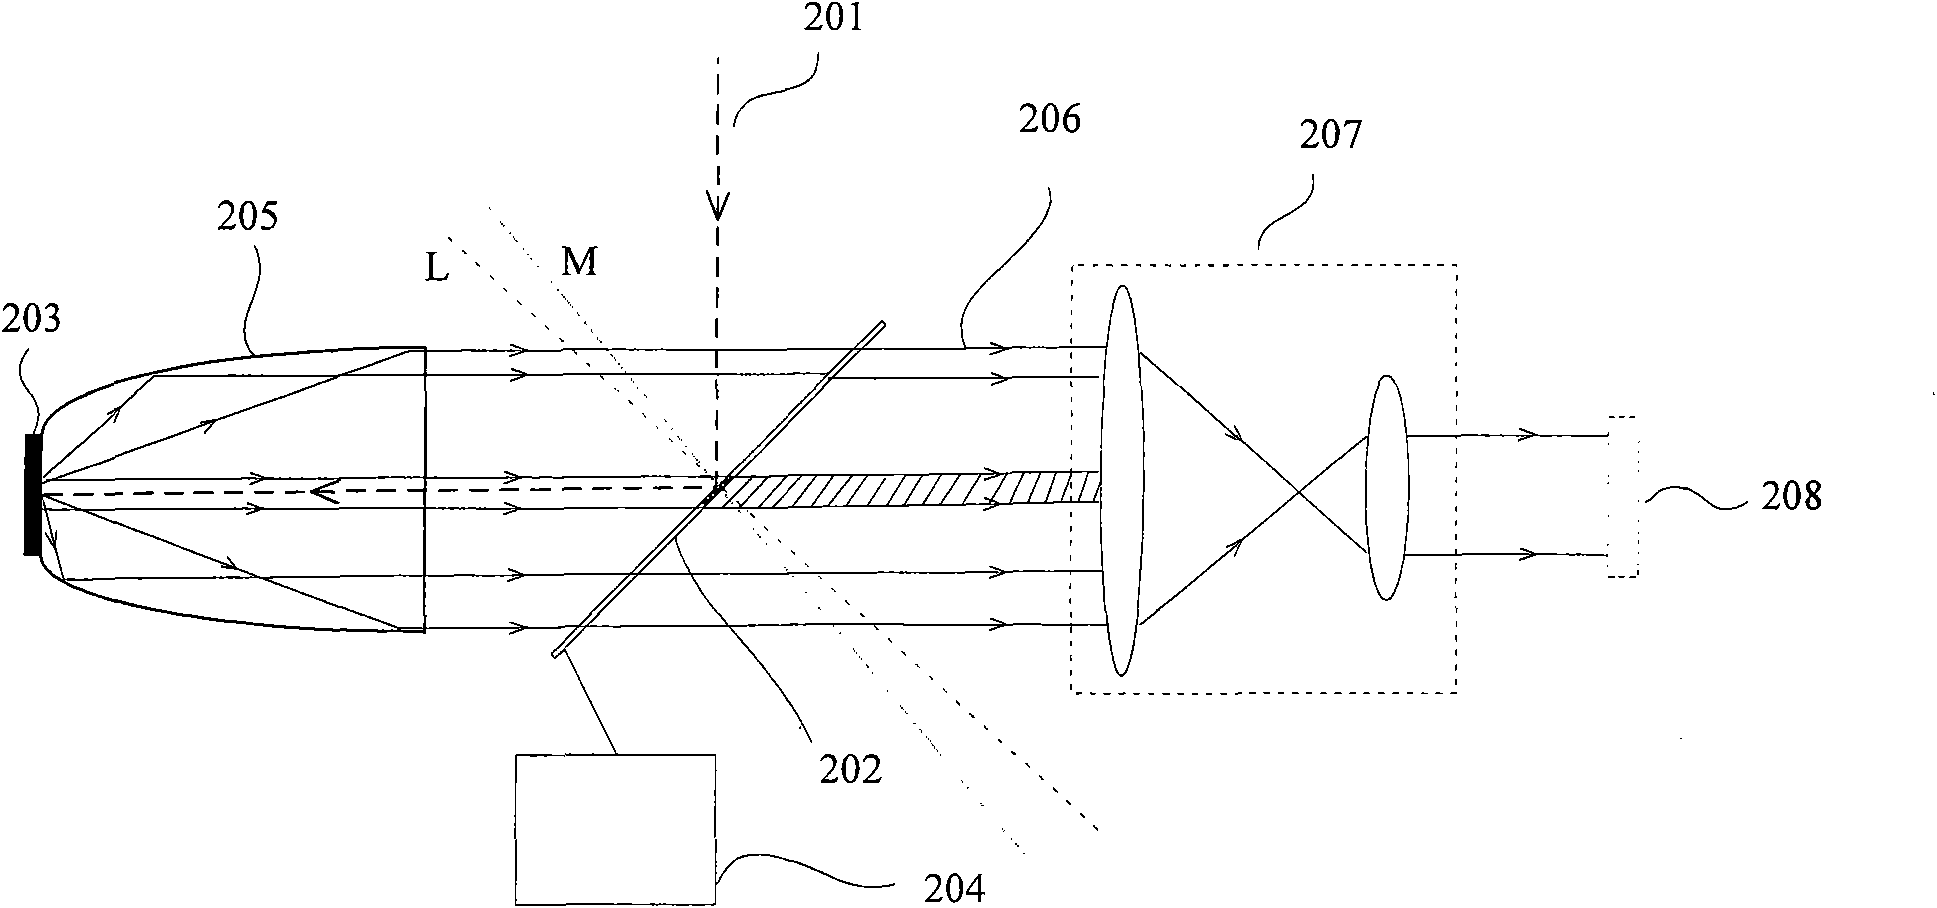 Decohering and shimming device